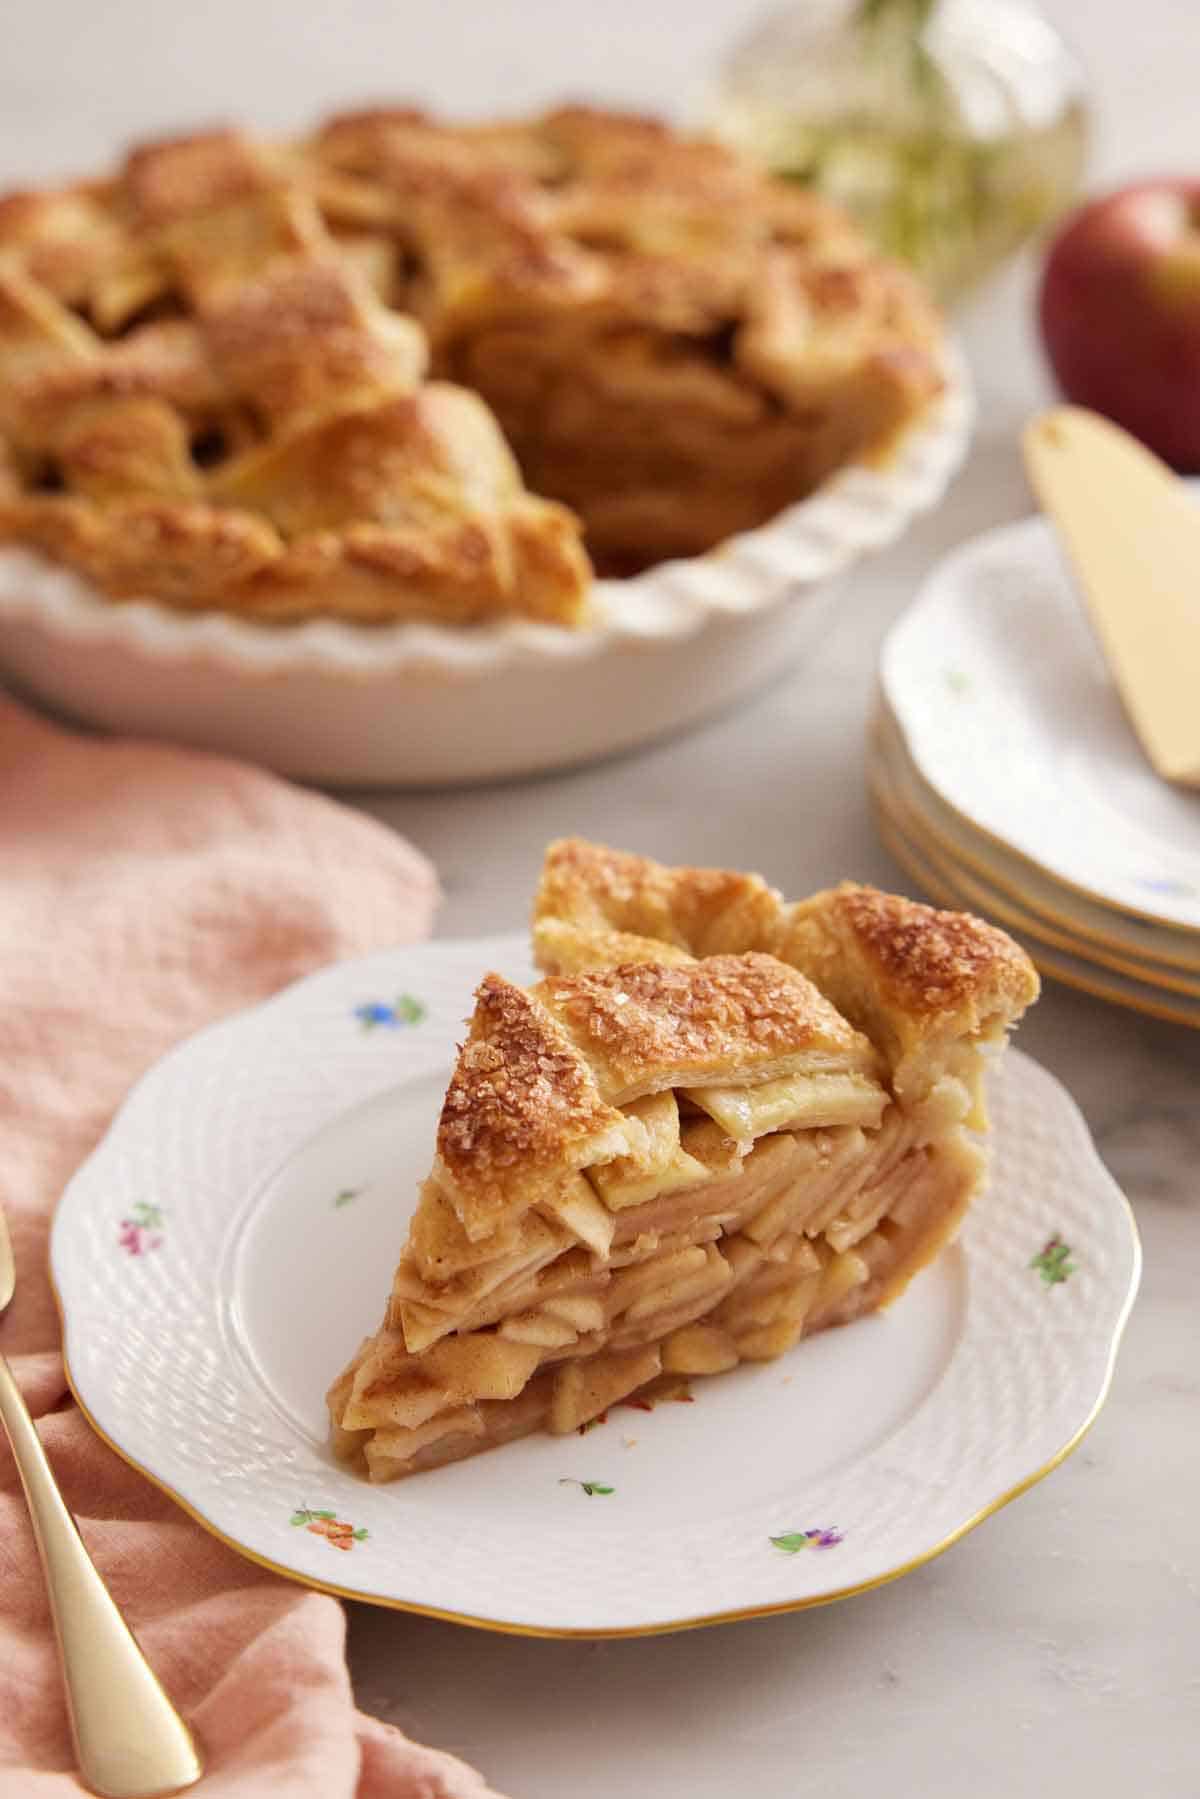 A slice of apple pie on a plate in front of the rest of the pie.